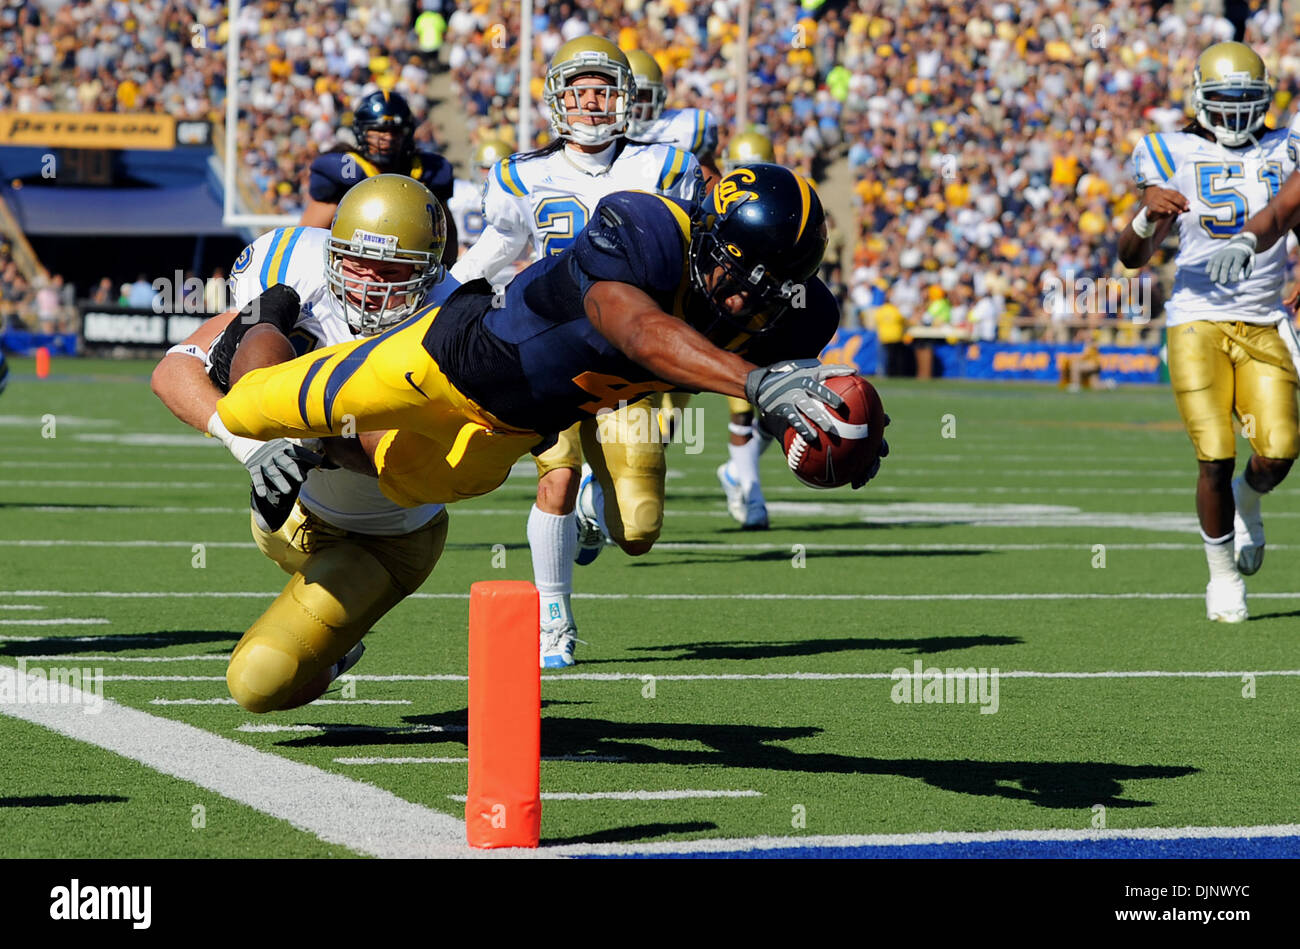 California Golden Bears Jhavid Best, #4, dives into the endzone to score a touchdown while being tackled by UCLA Bruins Joh Hale, #12, in the 2nd quarter of their game on Saturday, October 25, 2008 at Memorial Stadium in Berkeley, Calif. (Jose Carlos Fajardo/Contra Costa Times/ZUMA Press). Stock Photo